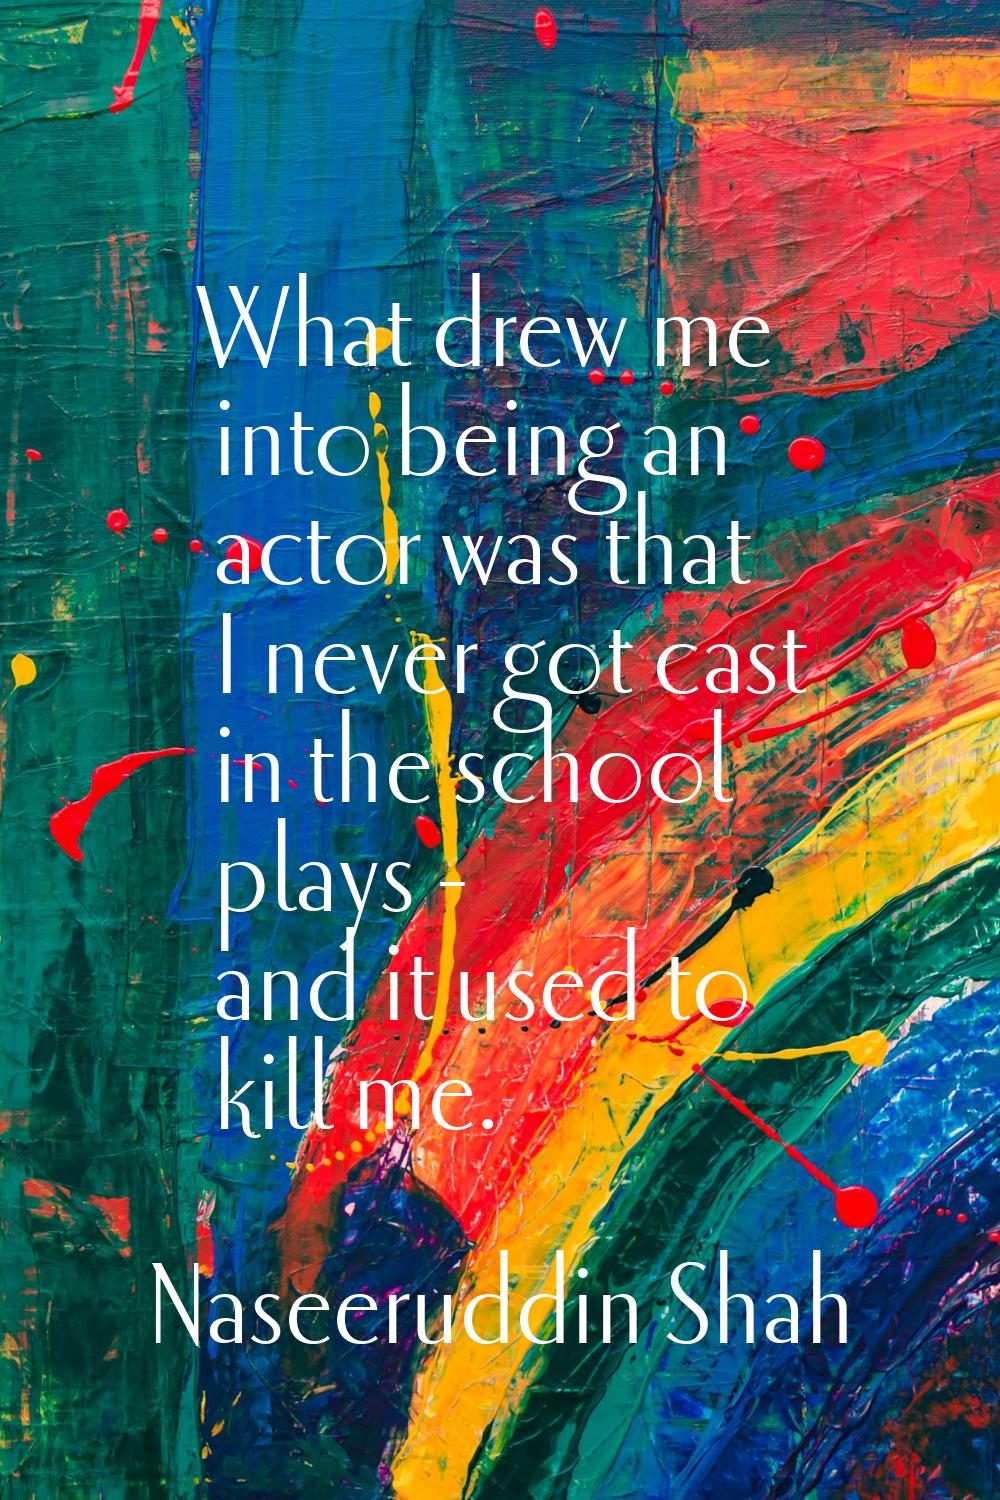 What drew me into being an actor was that I never got cast in the school plays - and it used to kil